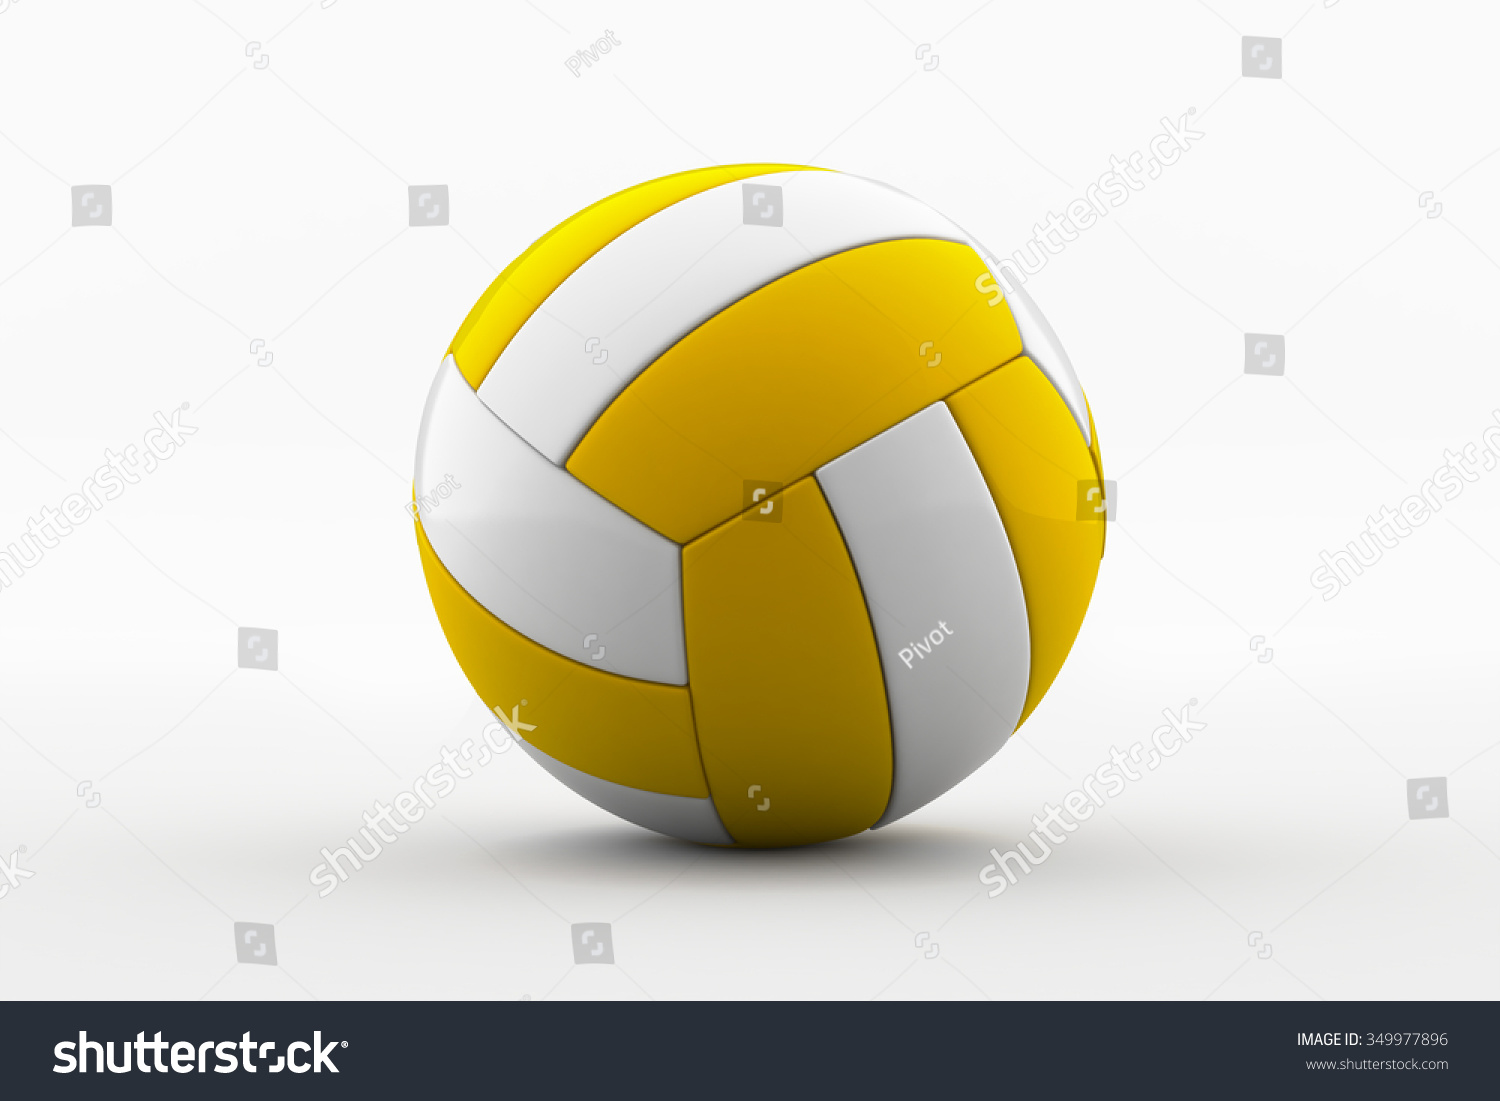 yellow volleyball clipart - photo #40